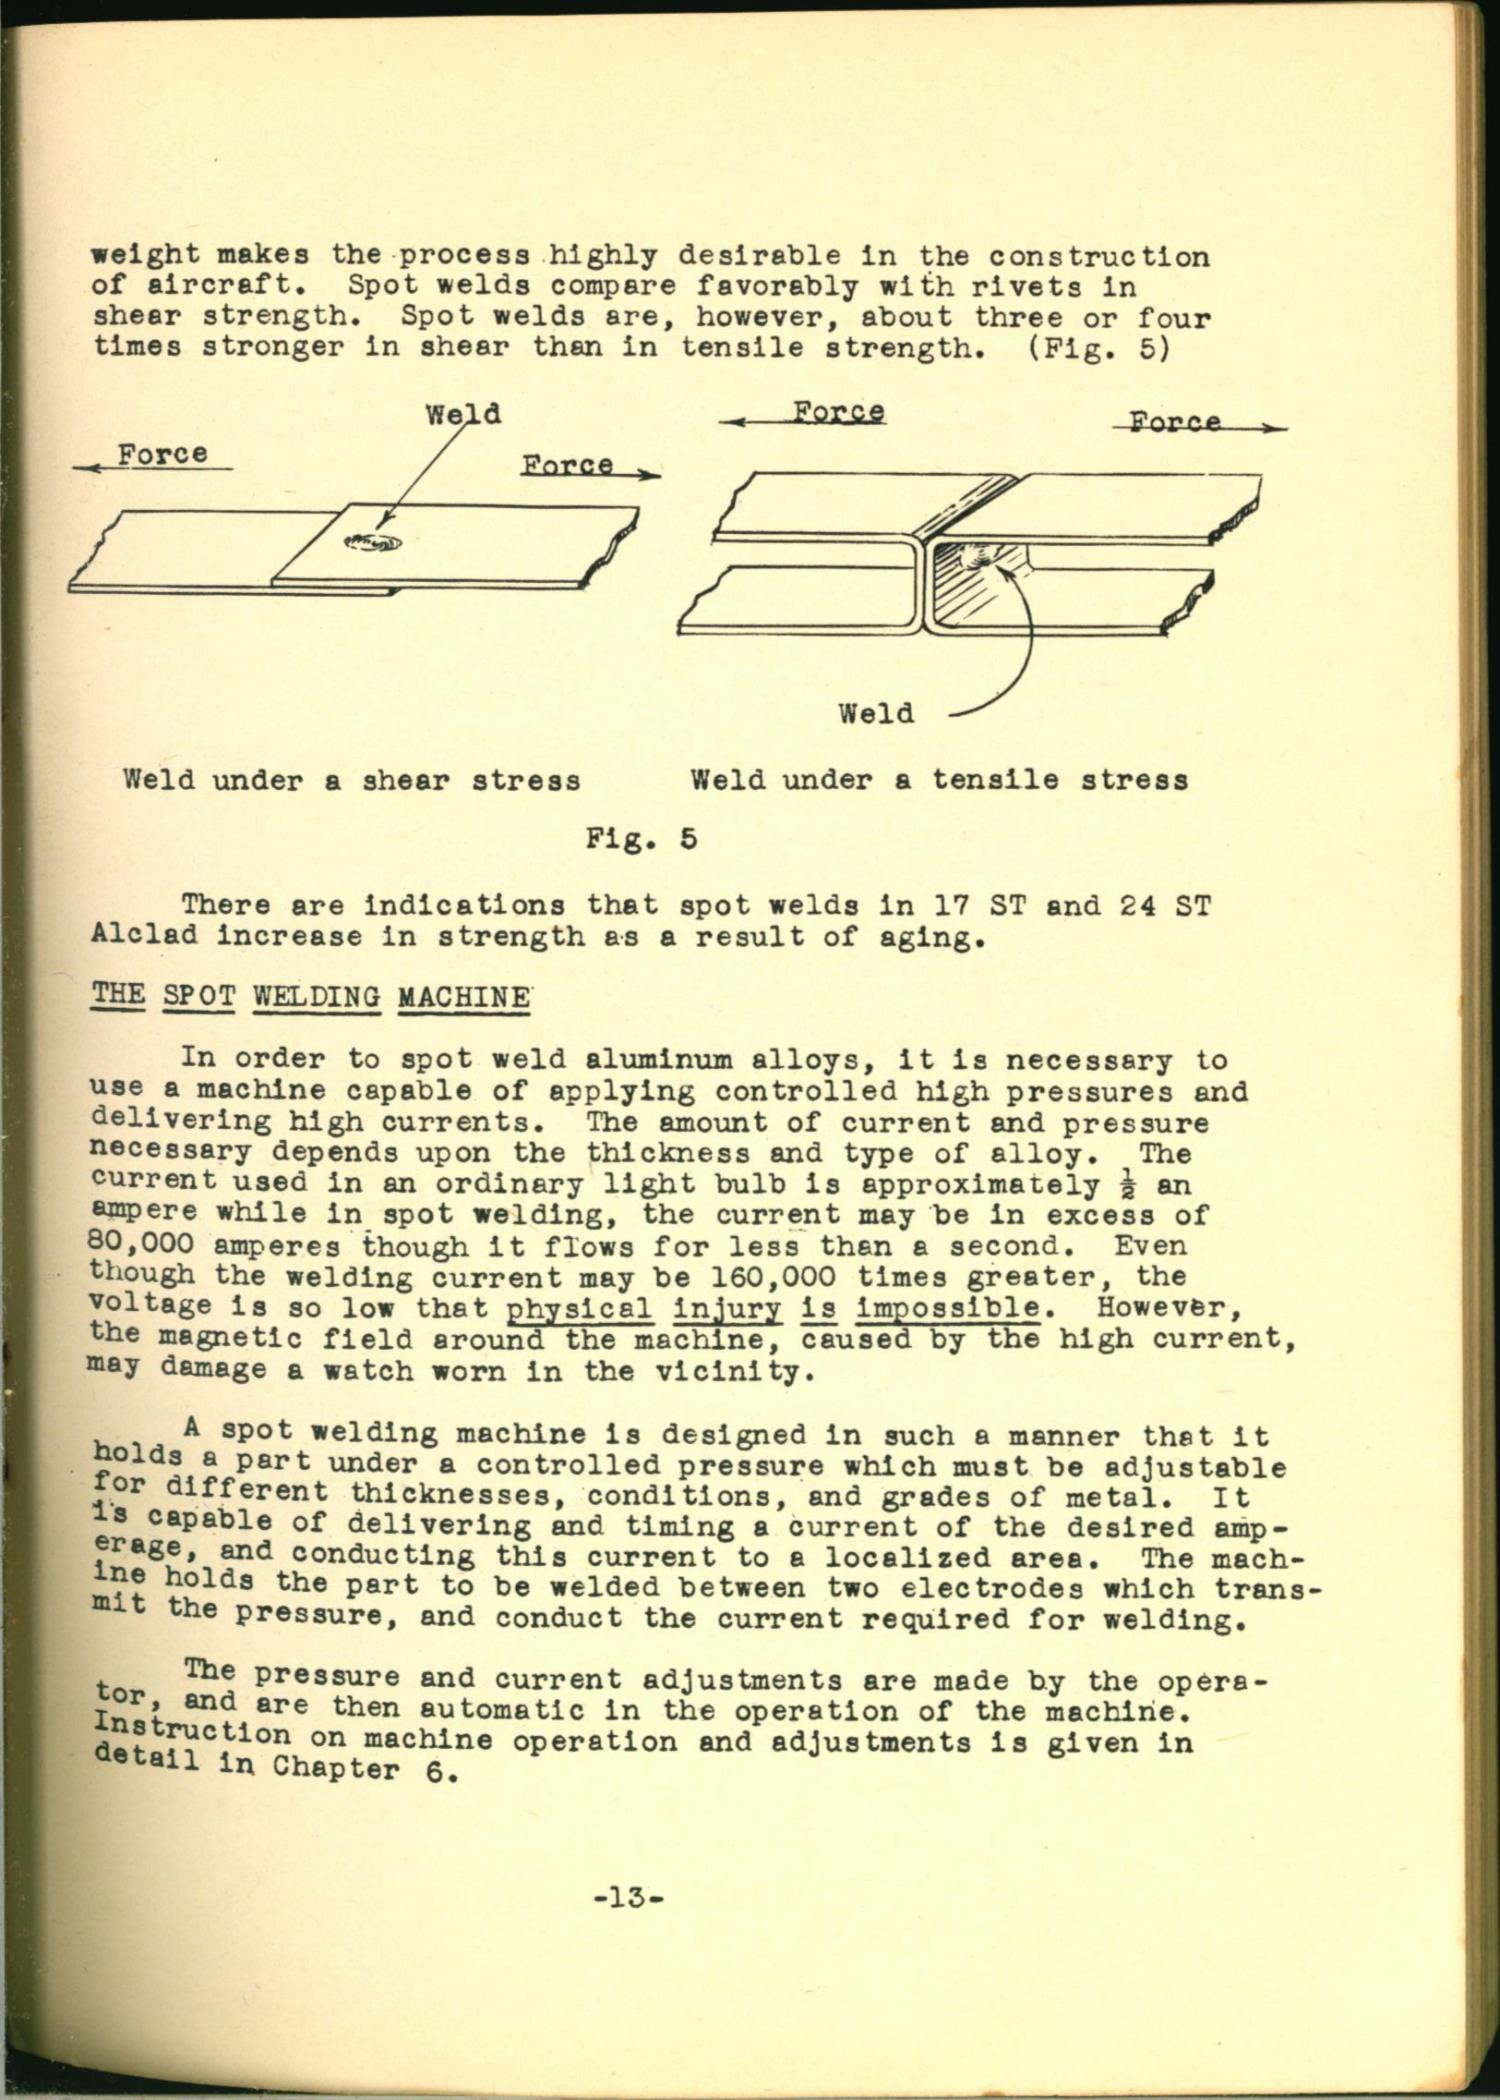 Sample page 23 from AirCorps Library document: Aircraft Spot Welding